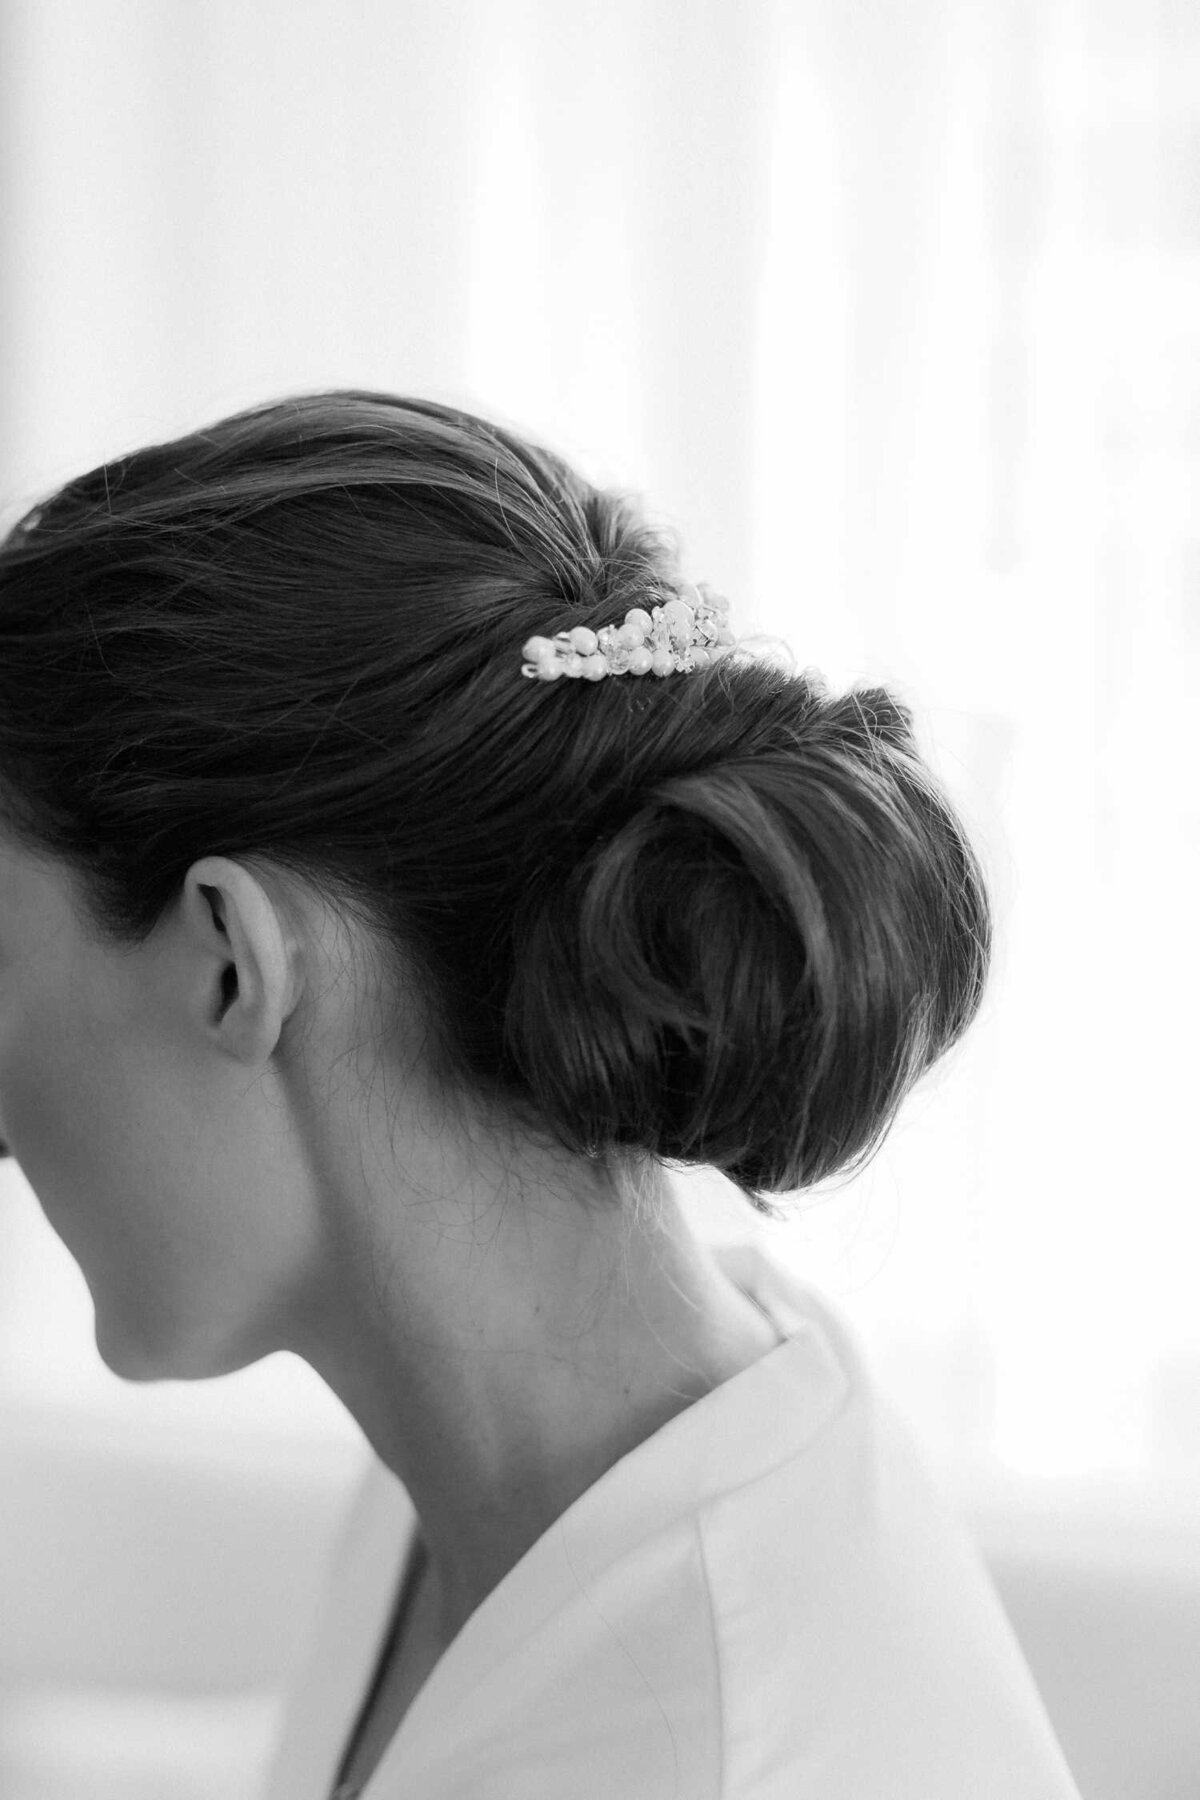 Chic Wedding Day Hair Chignon with pearl hair clip at Luxury Chicago Outdoor Historic Wedding Venue